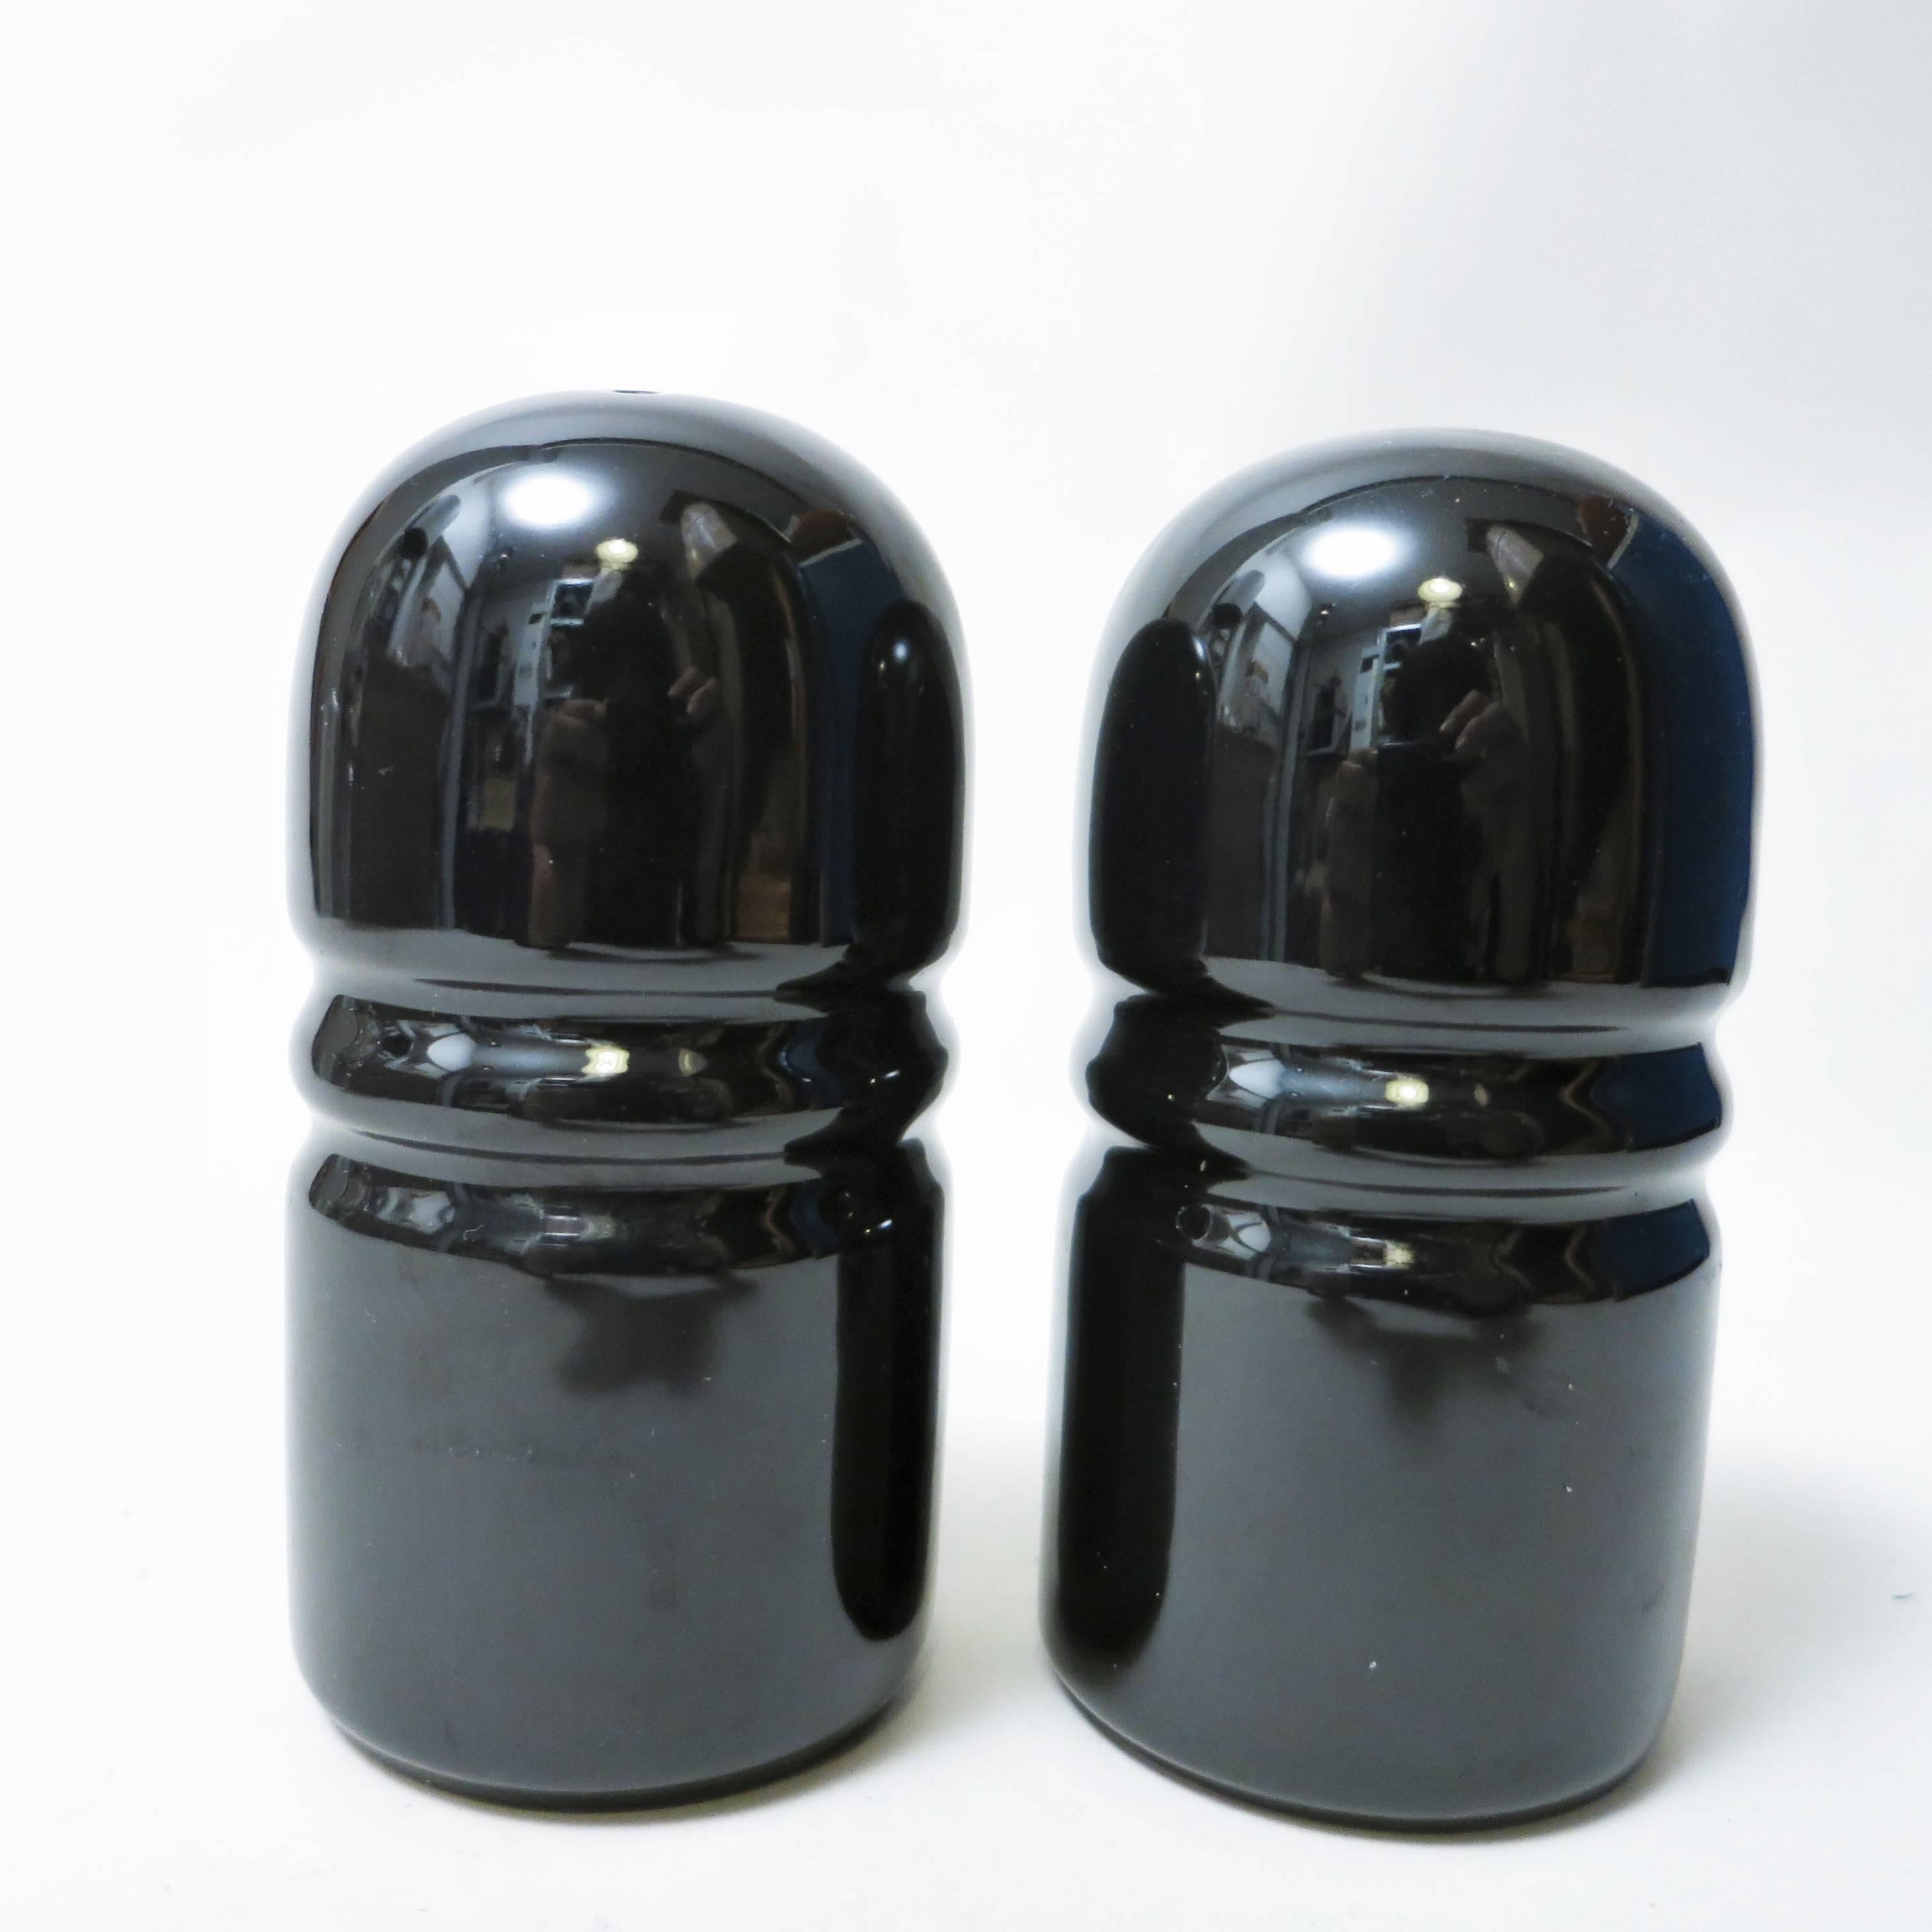 Enameled Salt and Pepper Shakers by Pino Spagnolo Sicart